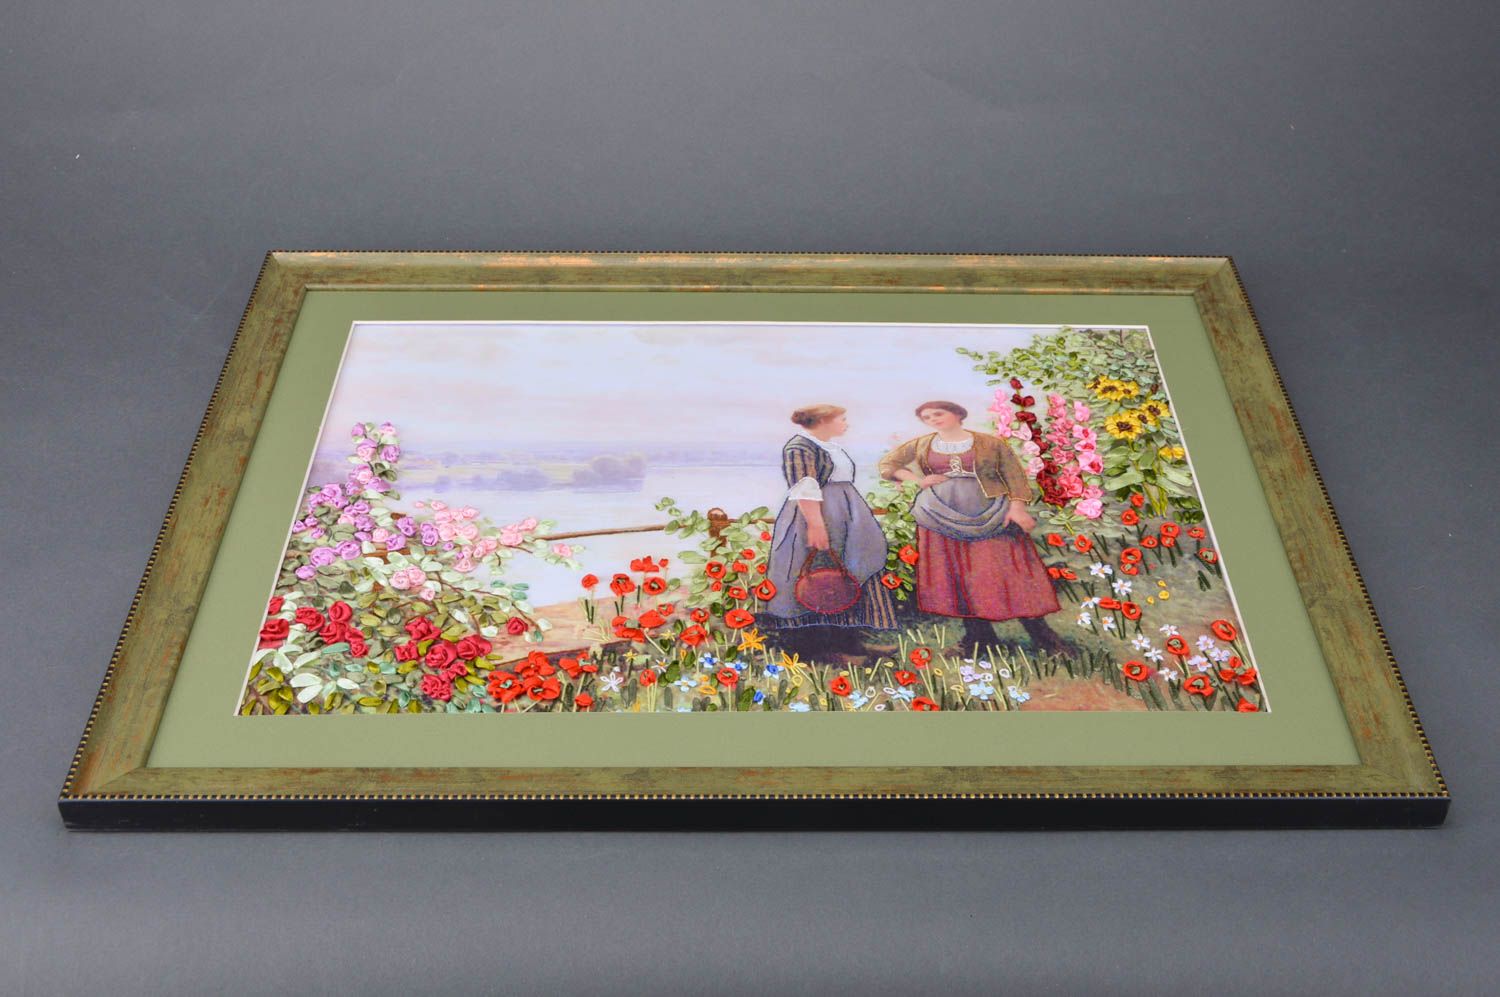 Handmade satin ribbon embroidery with flowers and girls in frame on canvas photo 2